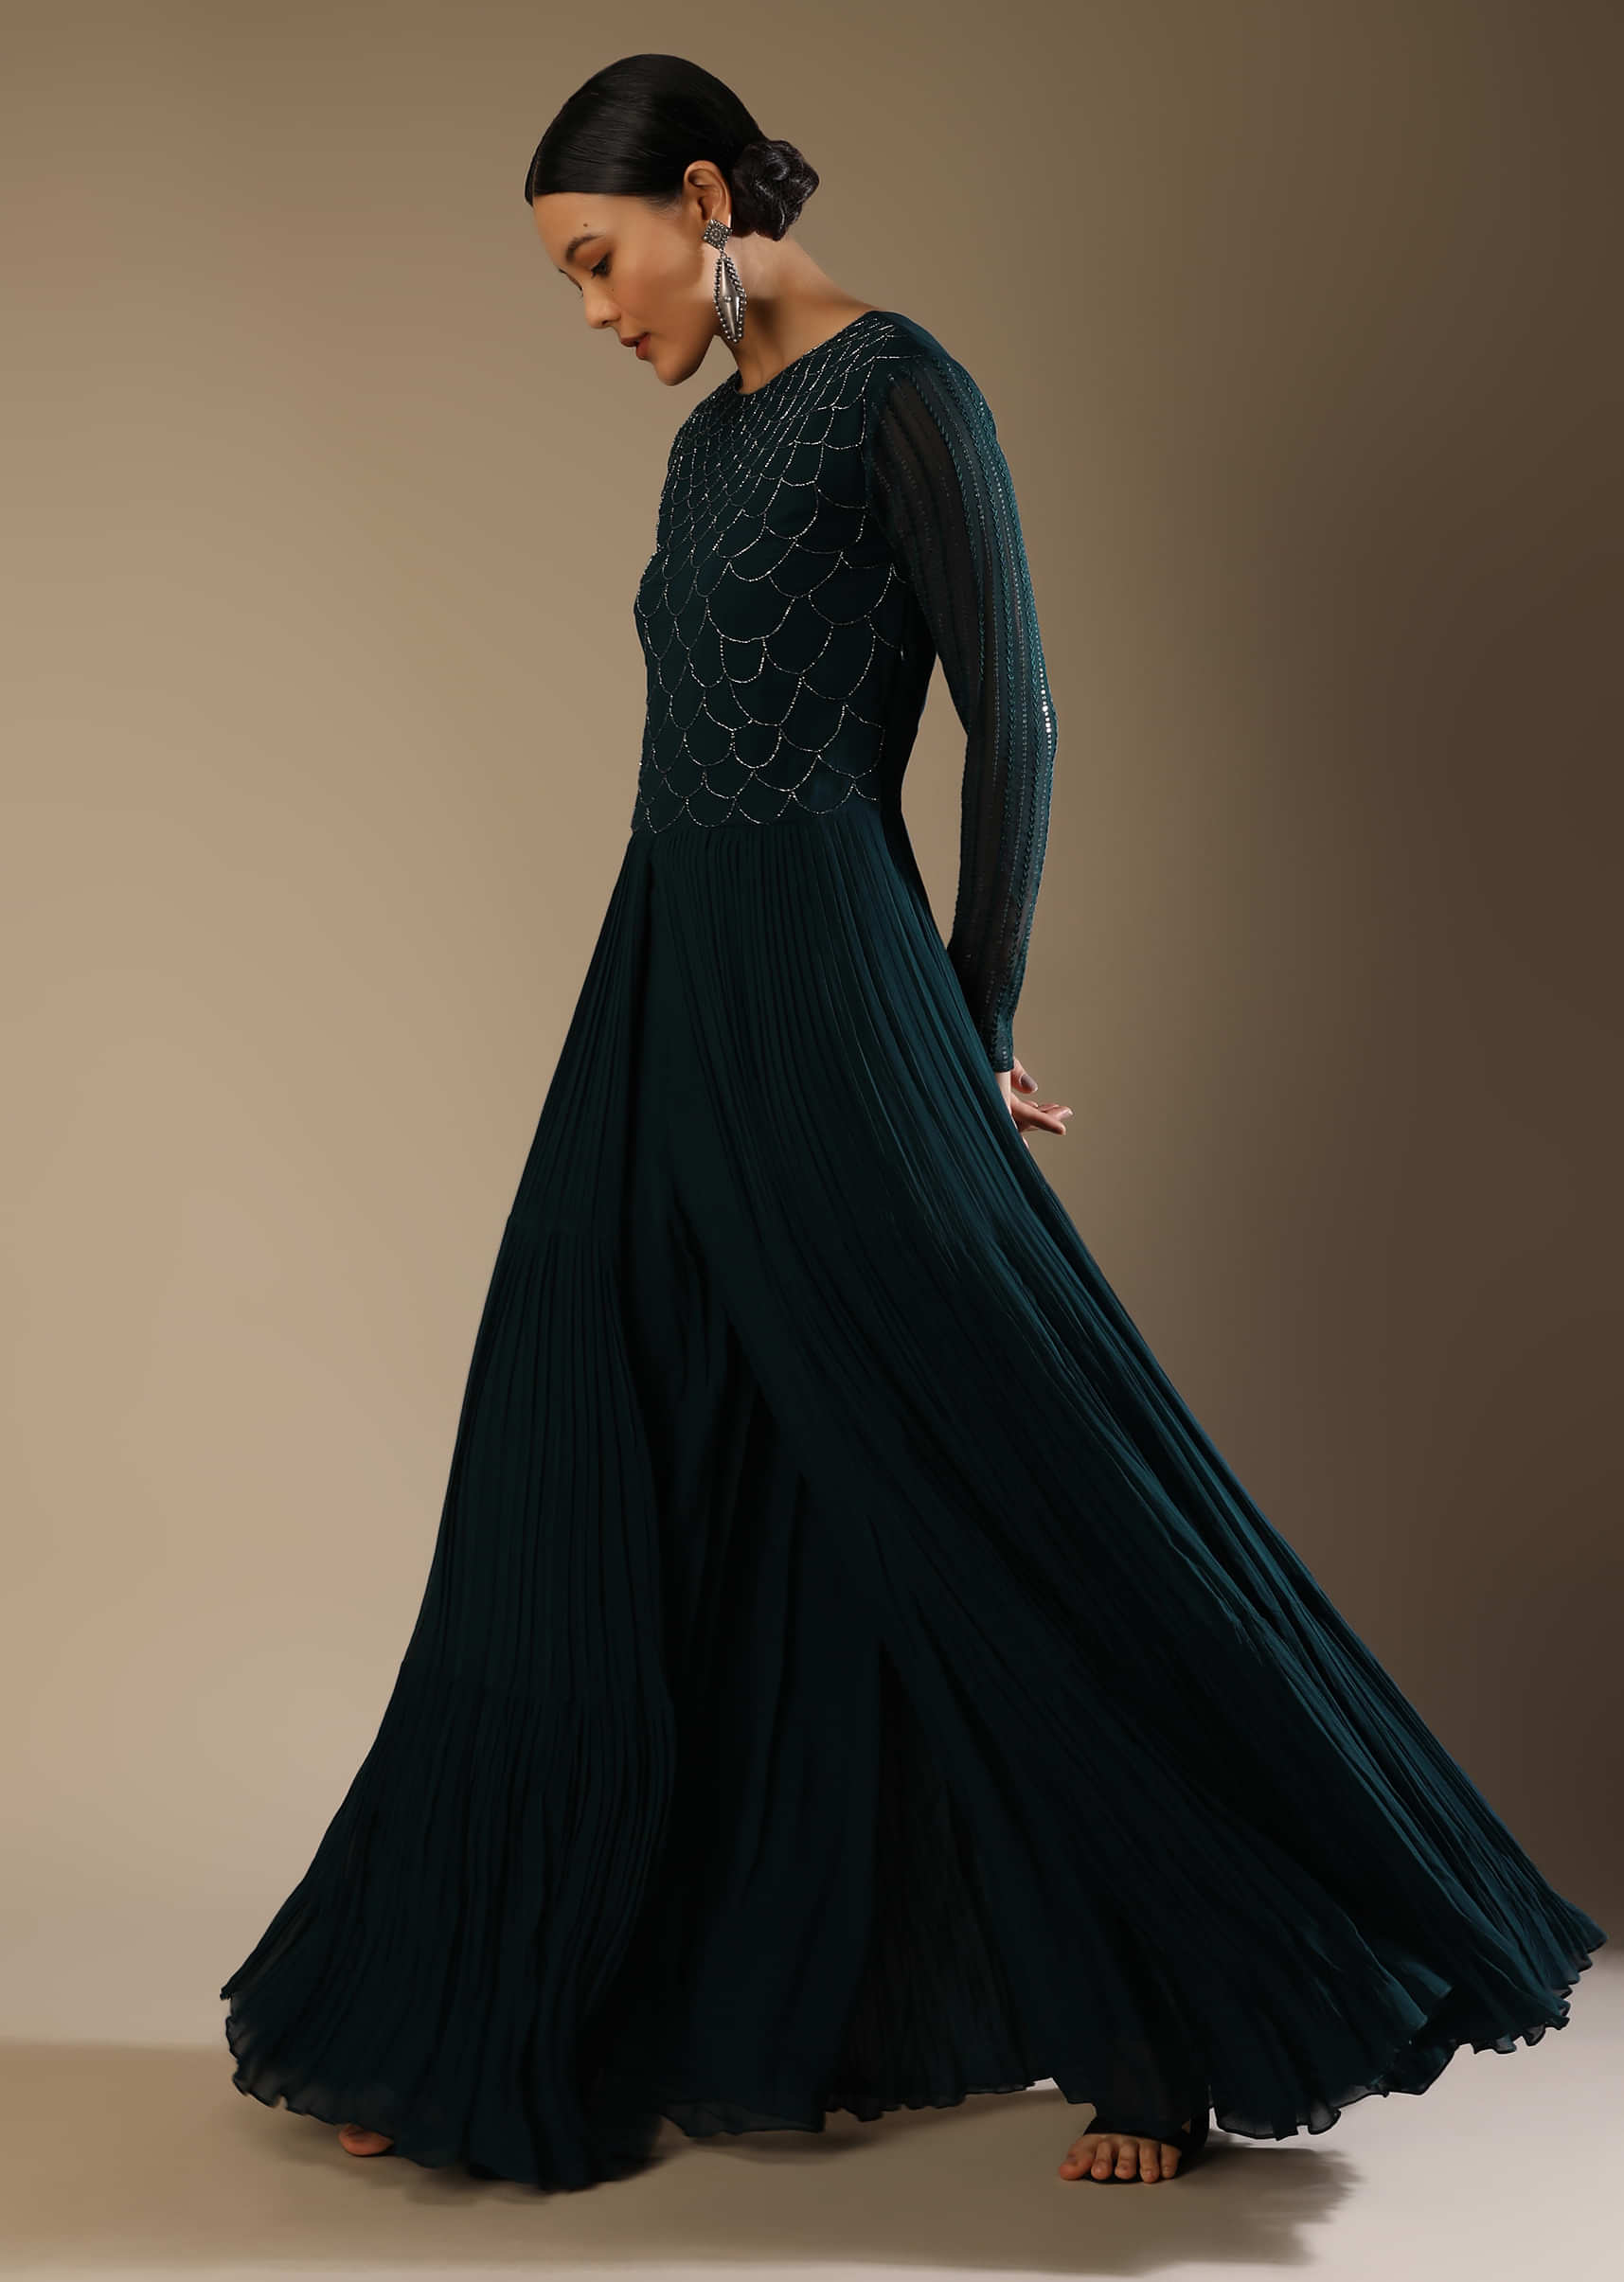 Dark Teal Palazzo Suit With A Long Slit Top Adorned In Cut Dana Work In Scallop Design  